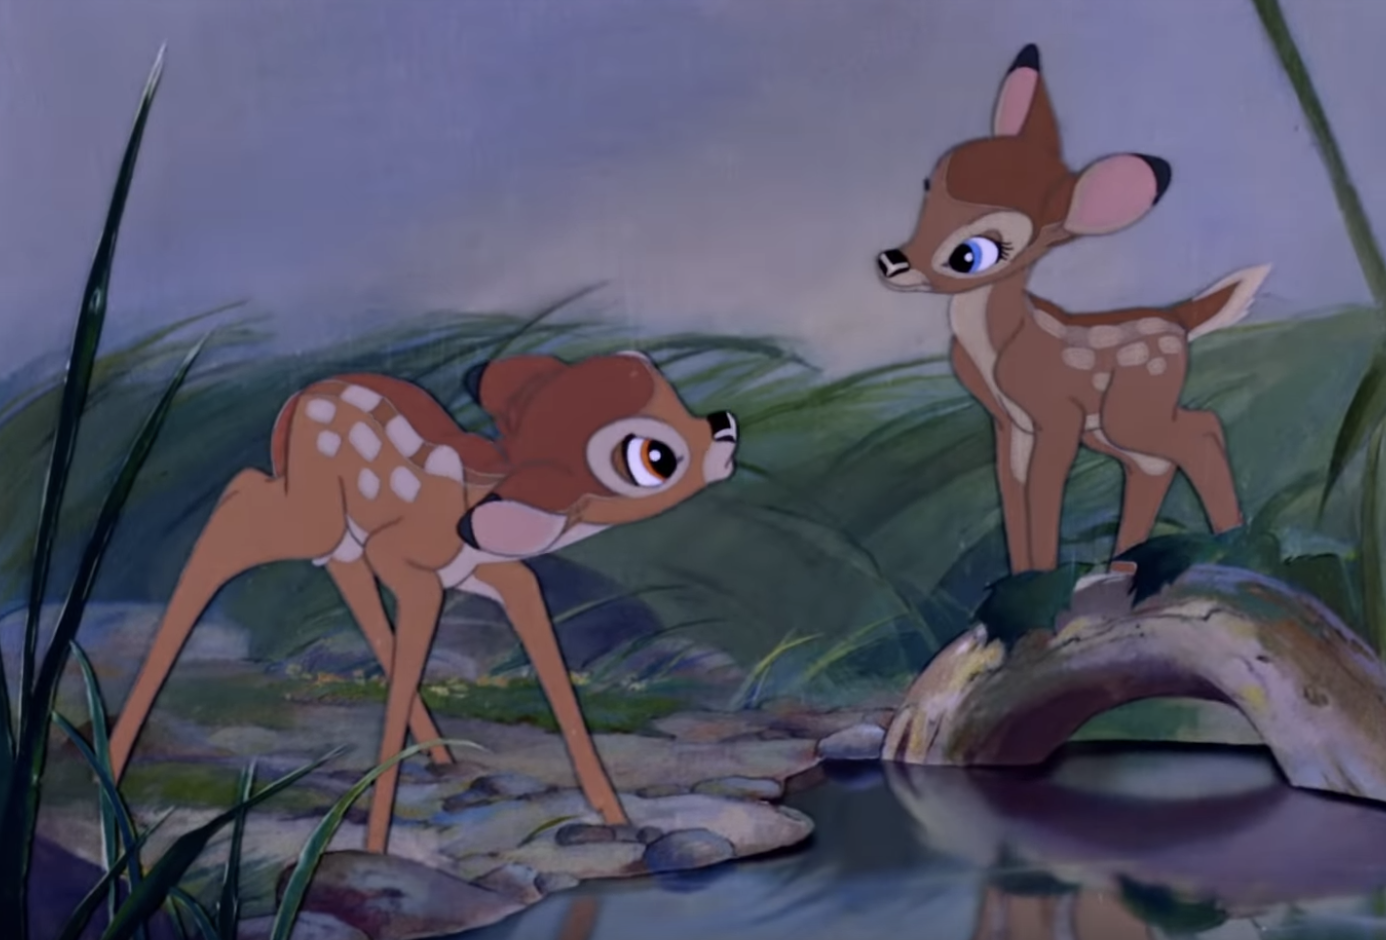 A poacher who killed hundreds of deer was sentenced to repeatedly watch 'Bambi'
	